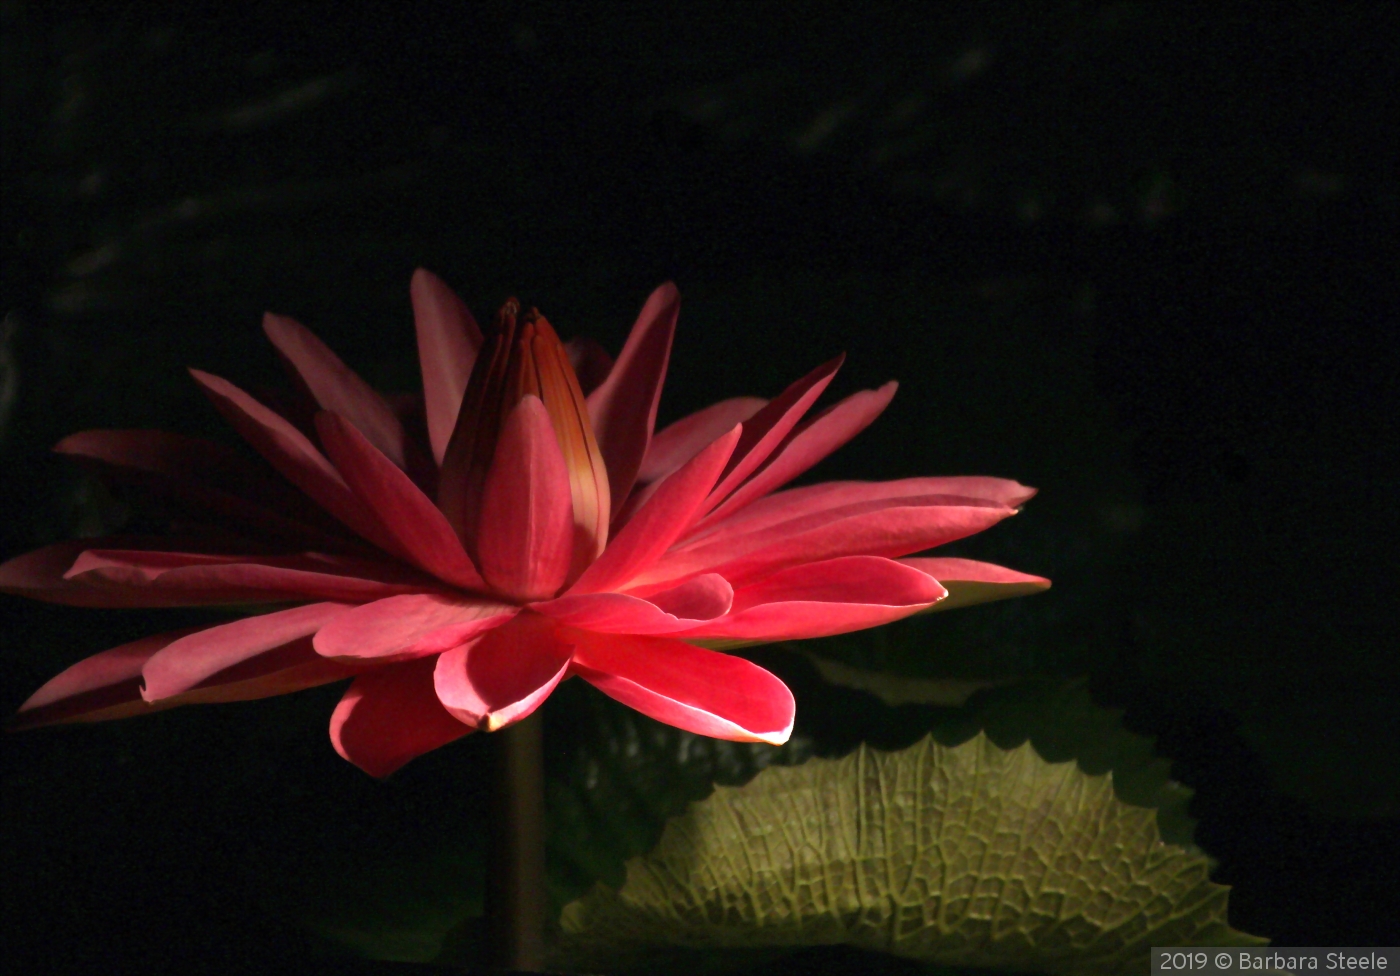 Nocturnal Waterlily by Barbara Steele